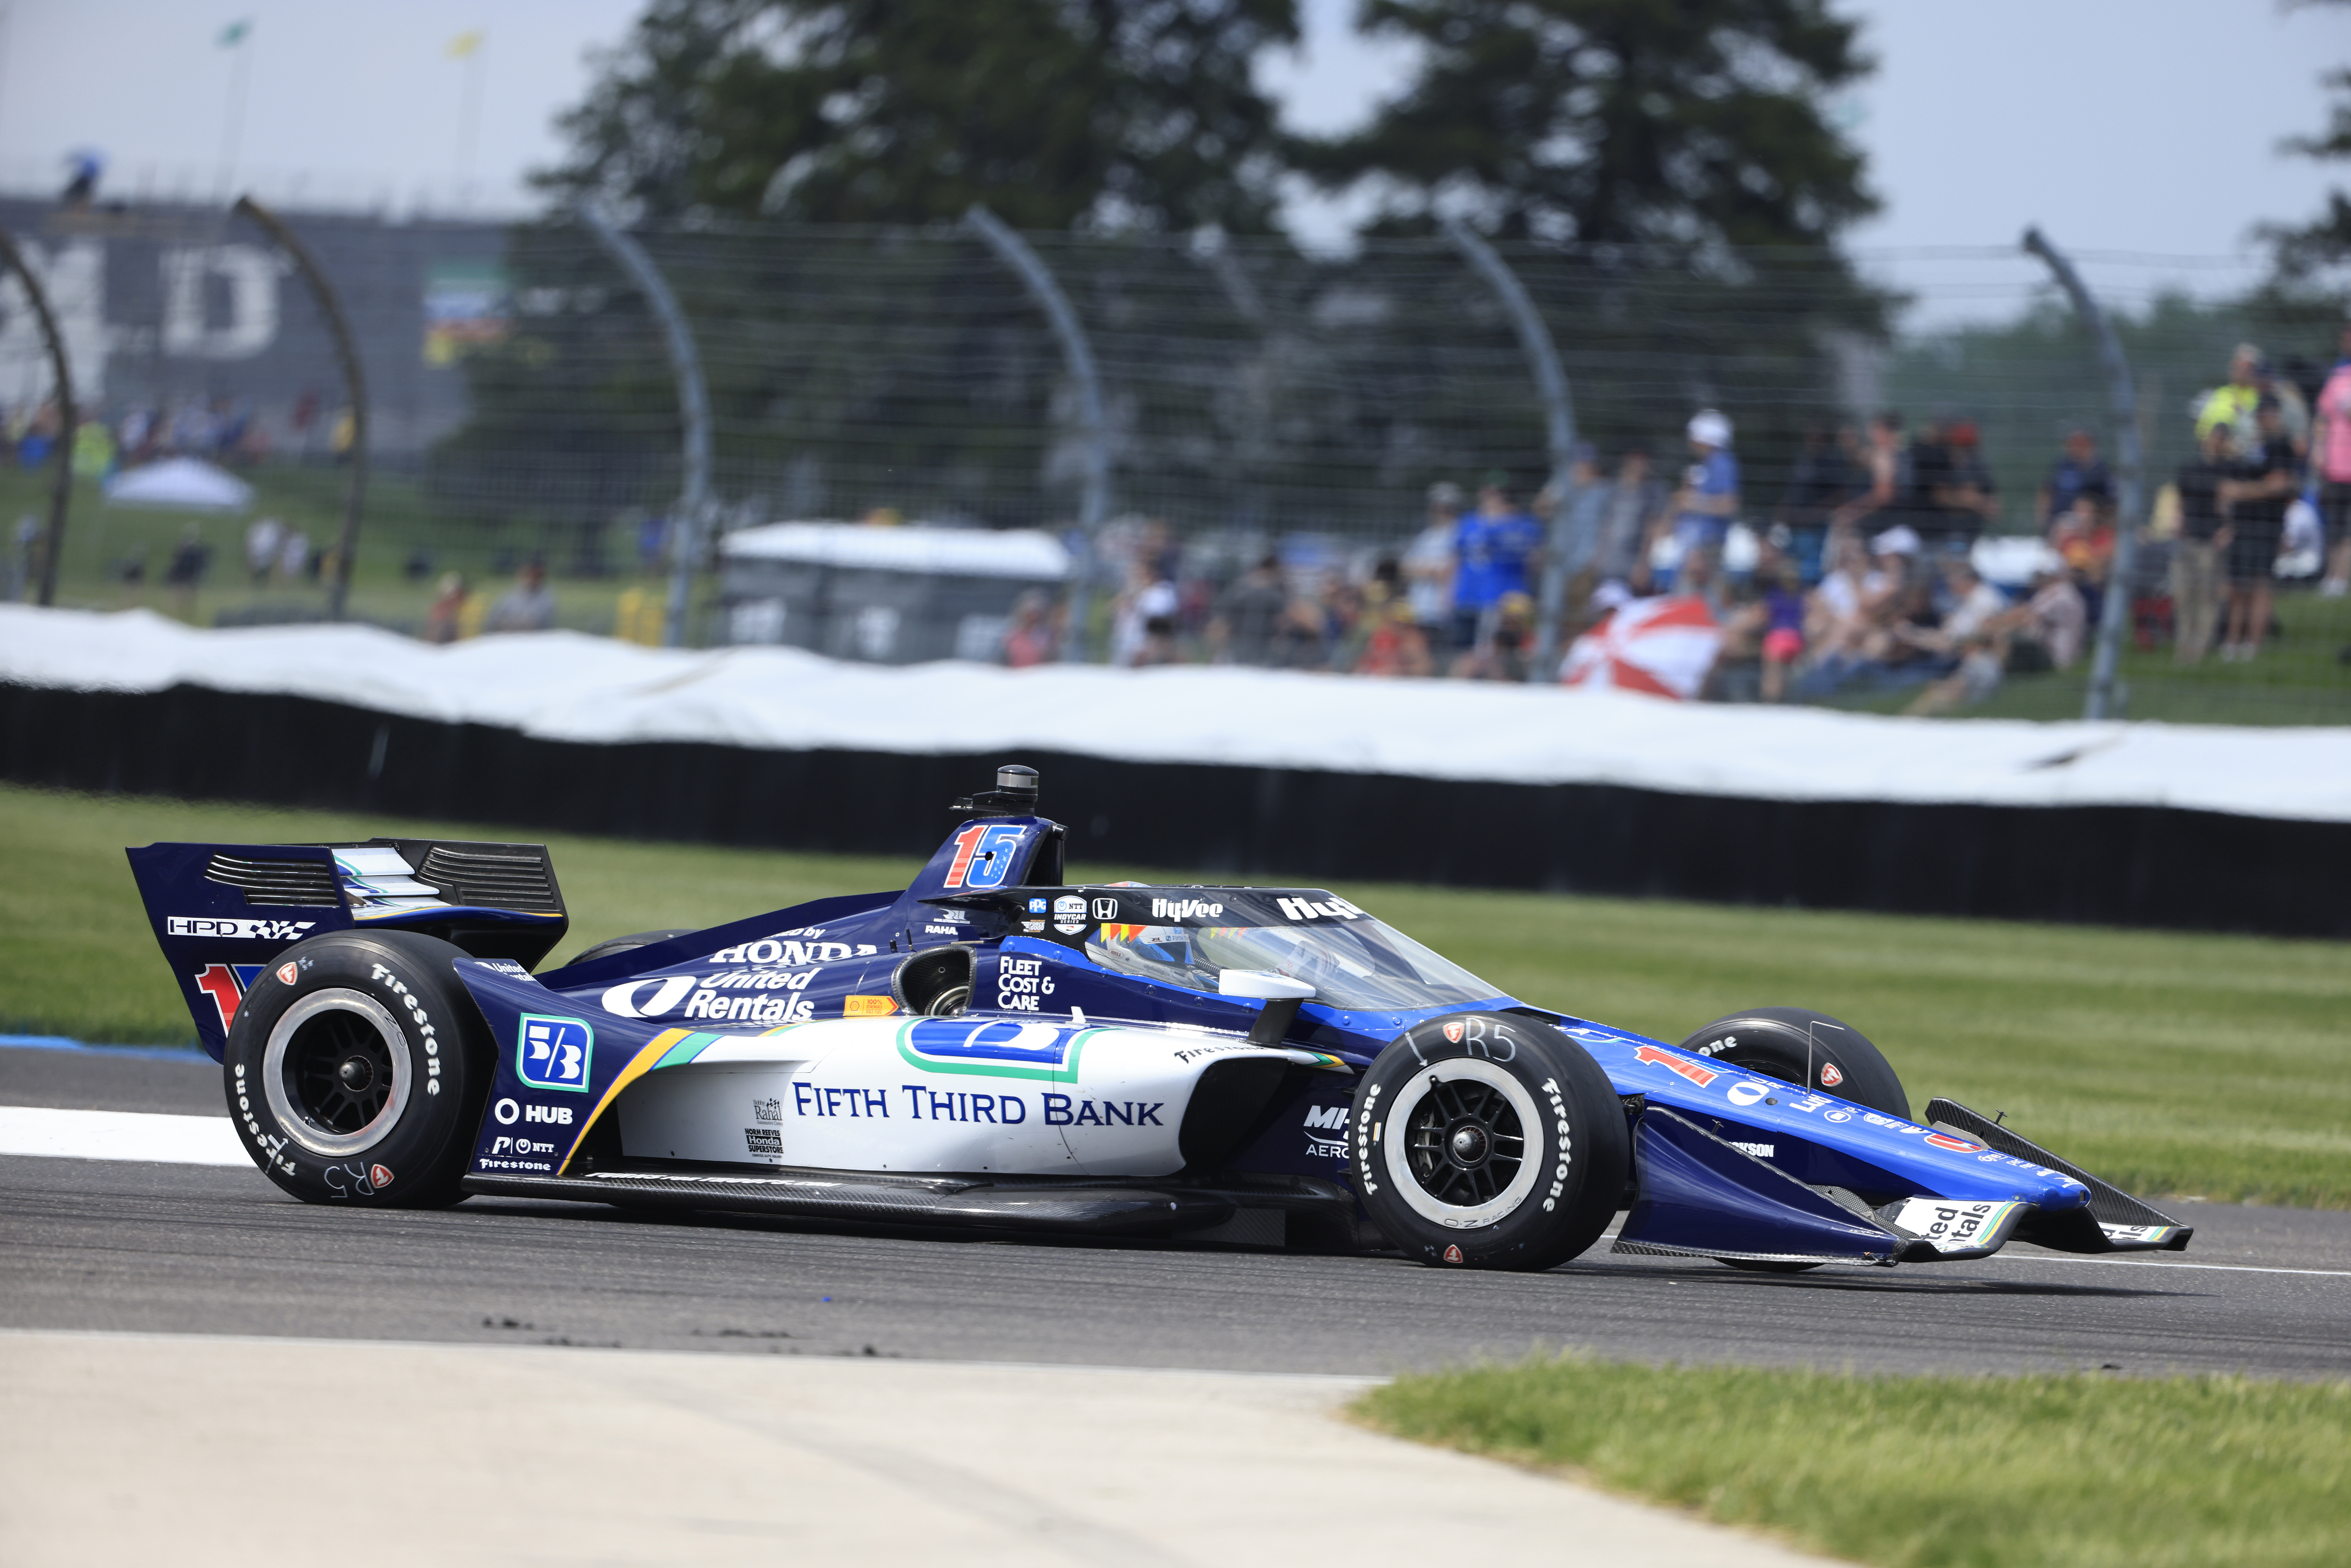 Graham Rahal, driver of the #15 Rahal Letterman Racing Honda, drives during the NTT IndyCar GMR Grand Prix at Indianapolis Motor Speedway on May 13, 2023 in Indianapolis, Indiana.  